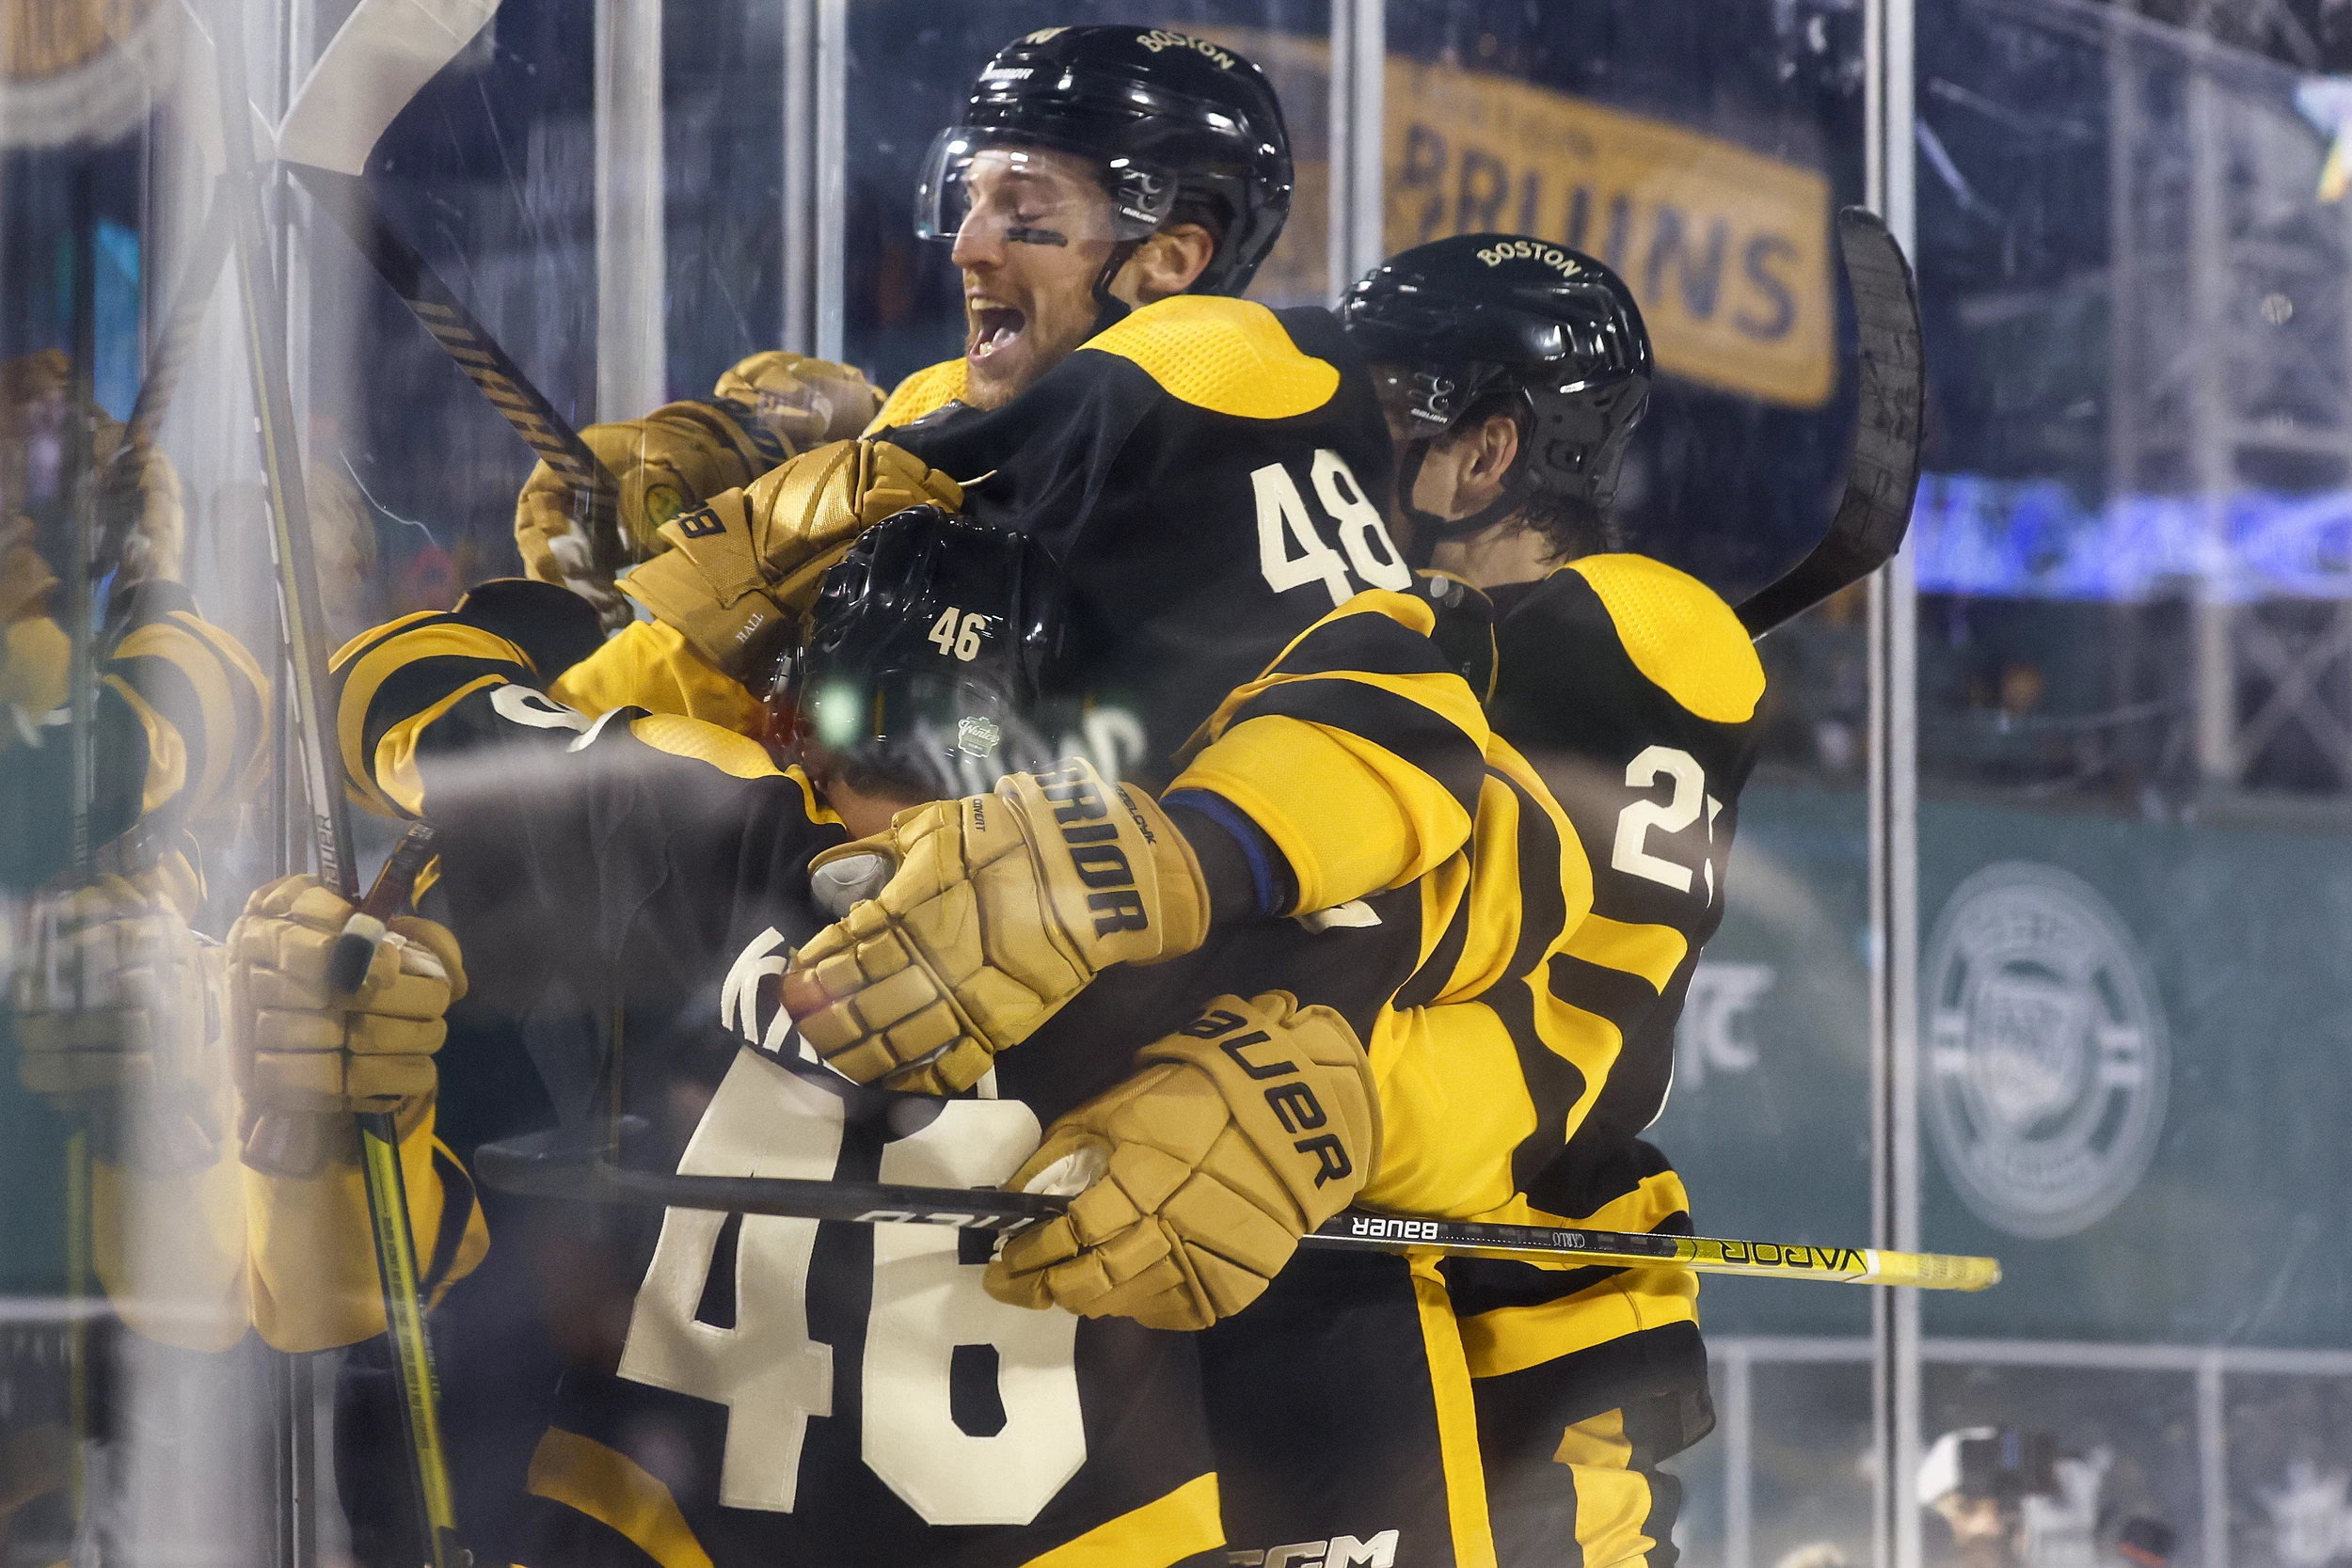 DeBrusk scores pair in final frame to lift Bruins past Penguins in